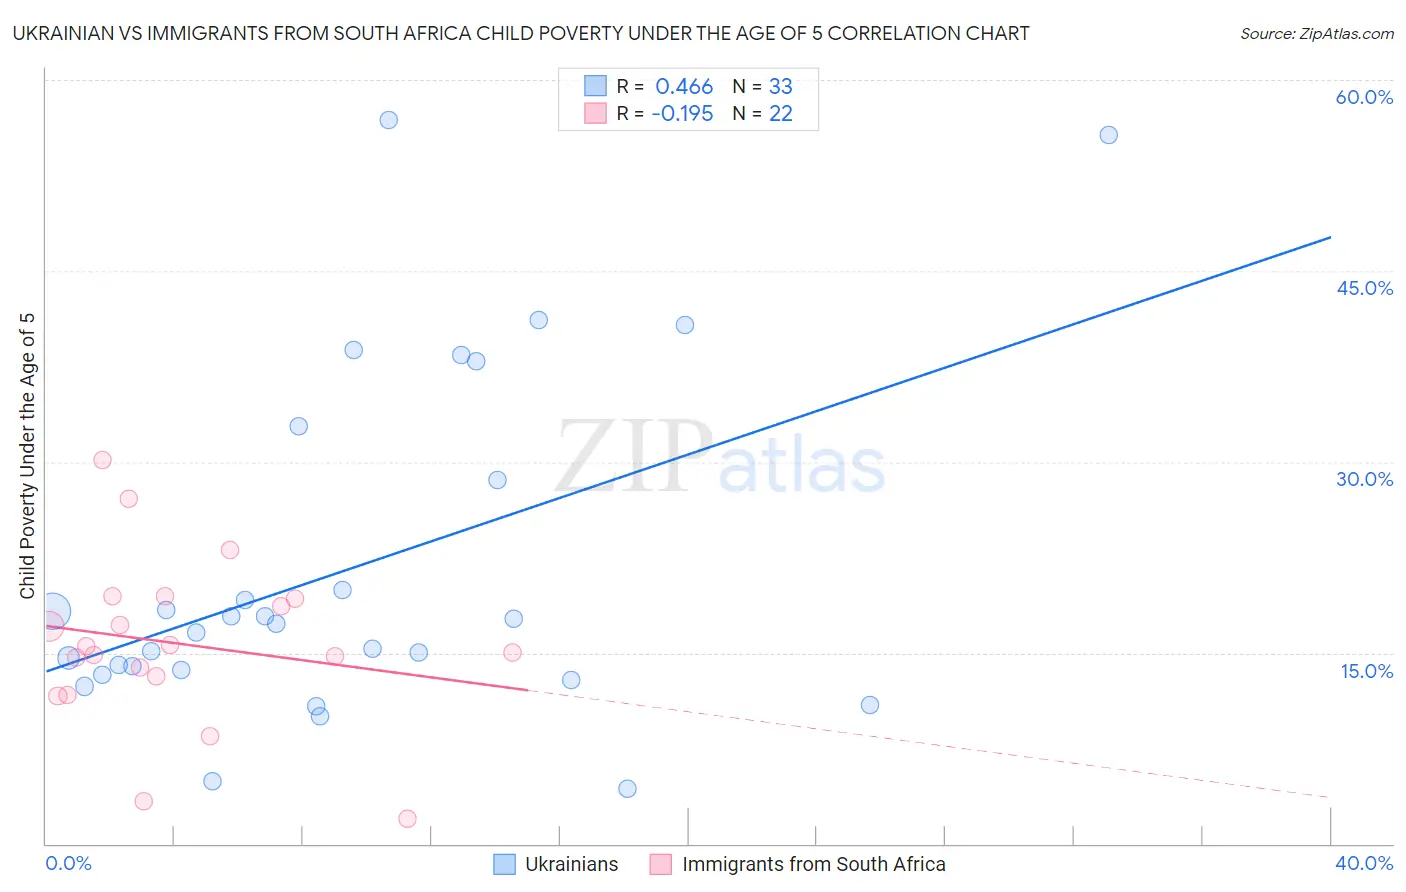 Ukrainian vs Immigrants from South Africa Child Poverty Under the Age of 5